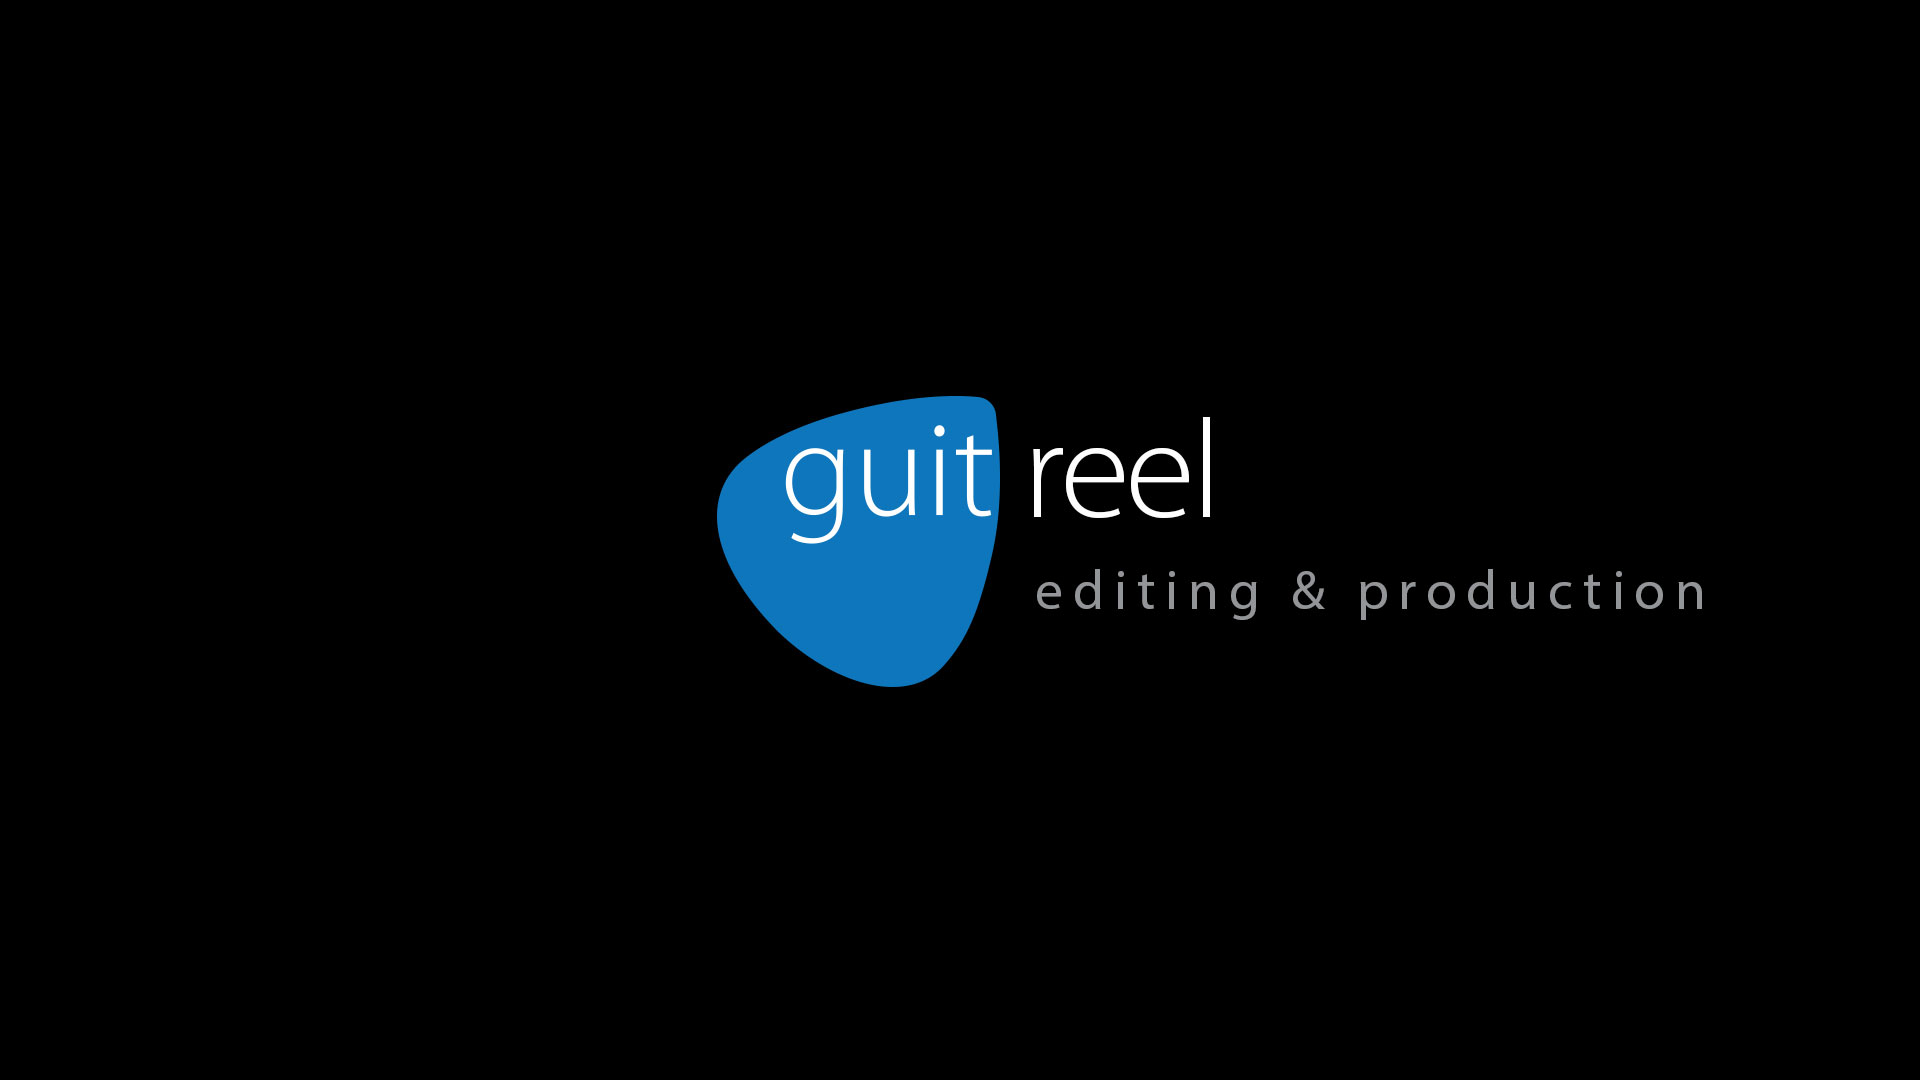 A black background with the words guit reel in white.